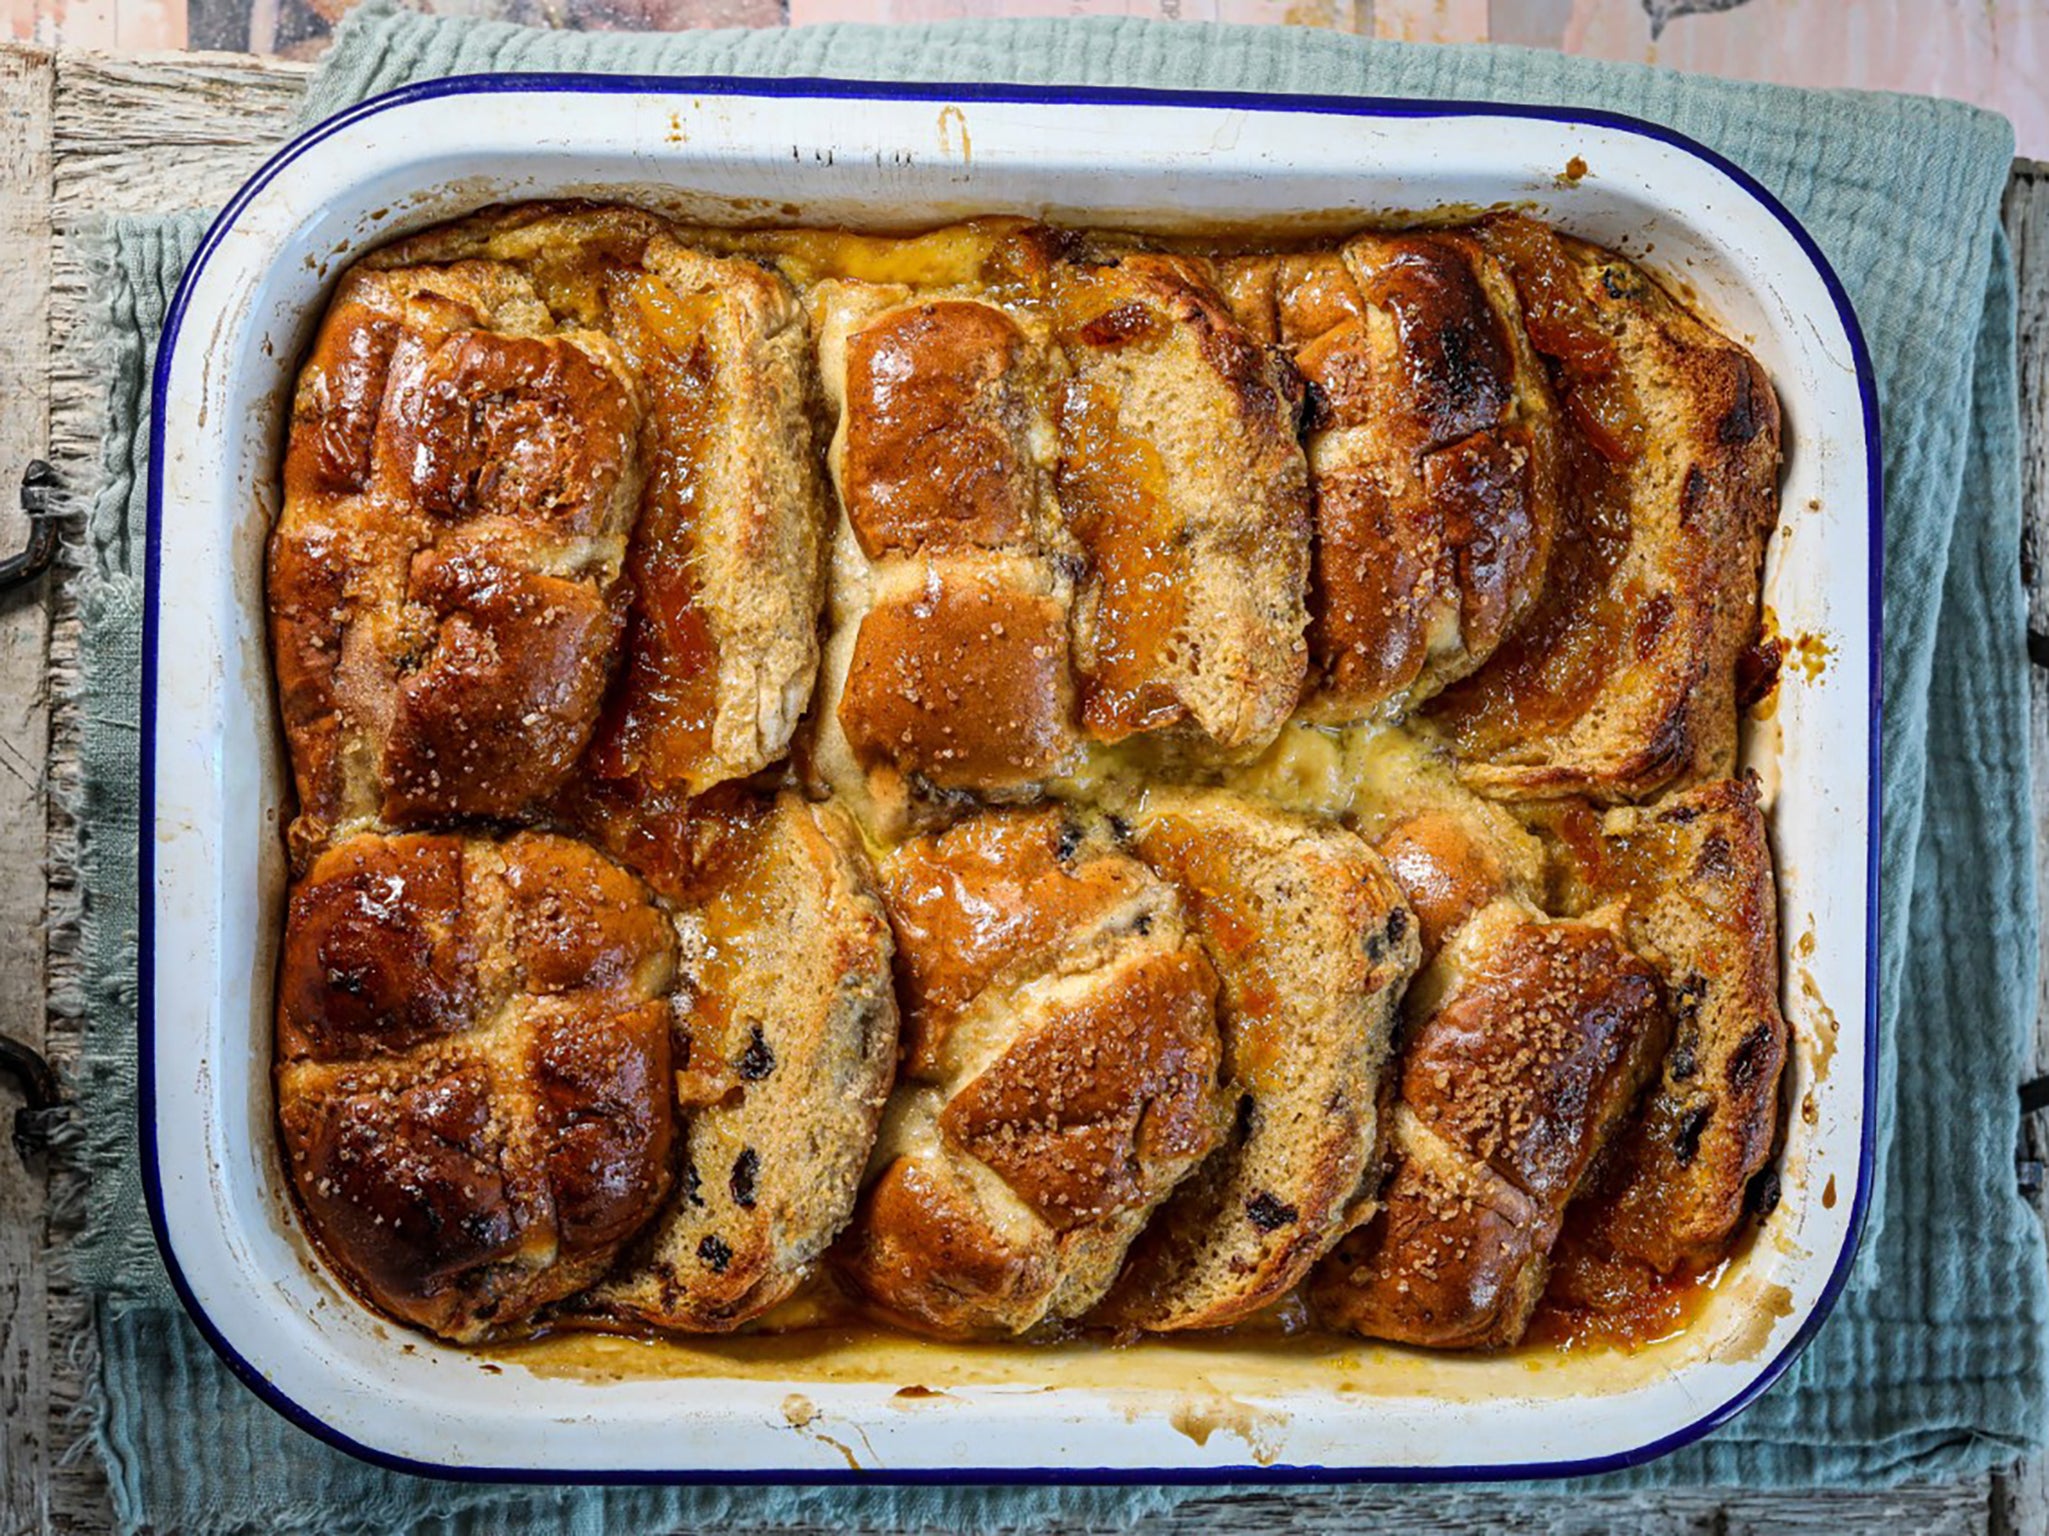 I like big buns and I cannot lie: Maple butter and marmalade give this dish extra zing